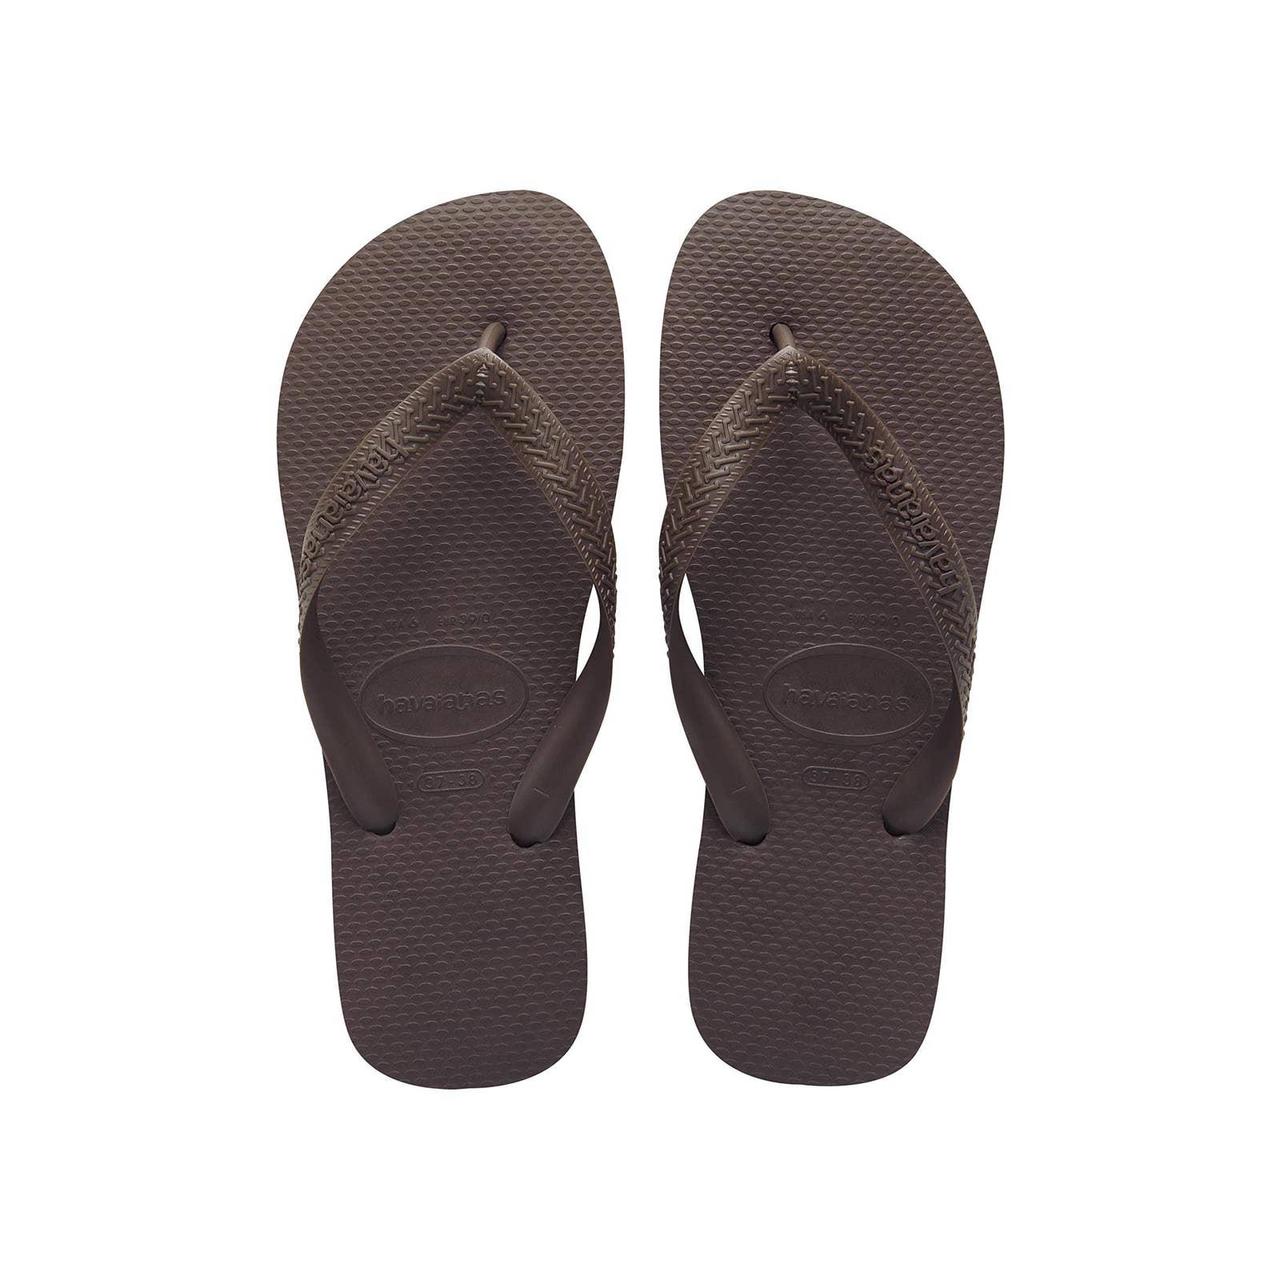 Product Image 1 - Havaianas Brown Flip Flops

Great condition
Size